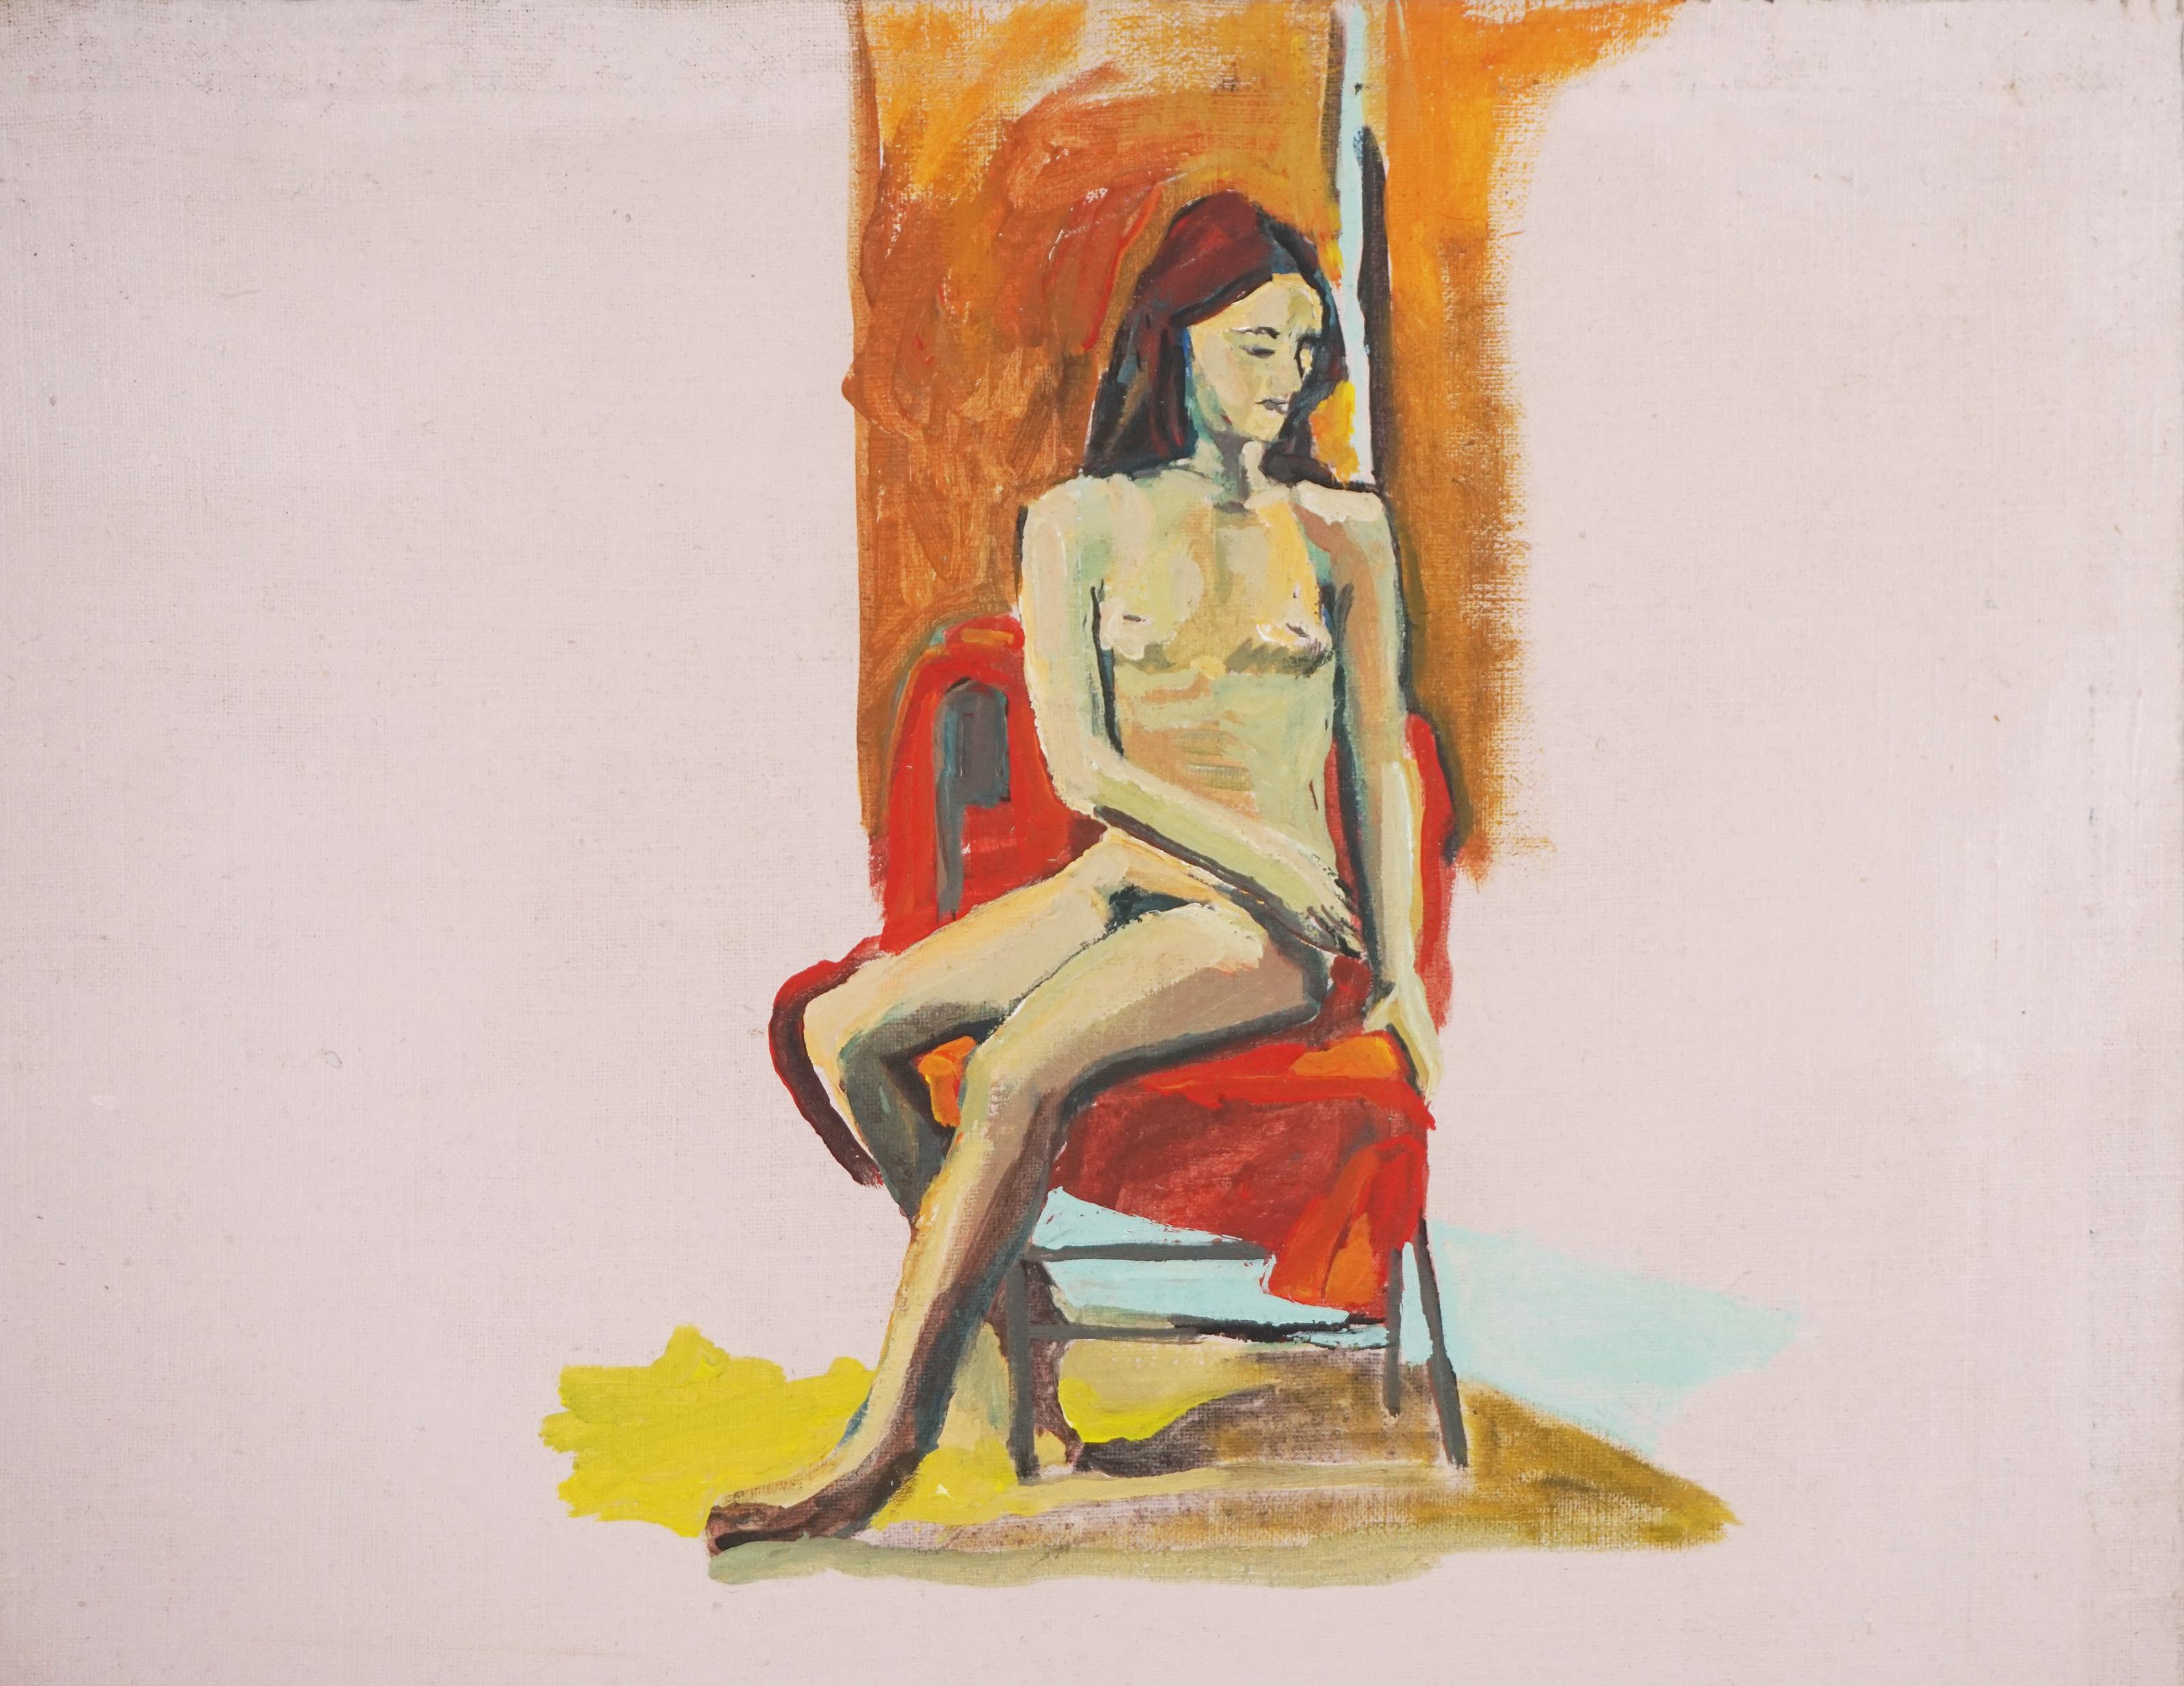 Modern nude study of woman seated in chair by American painter, Patricia Gren Hayes (b. 1932). Red haired women with side view of same woman with asymmetrical composition circa 1970.

Unsigned. 
Provenance: Purchased as part of larger collection of